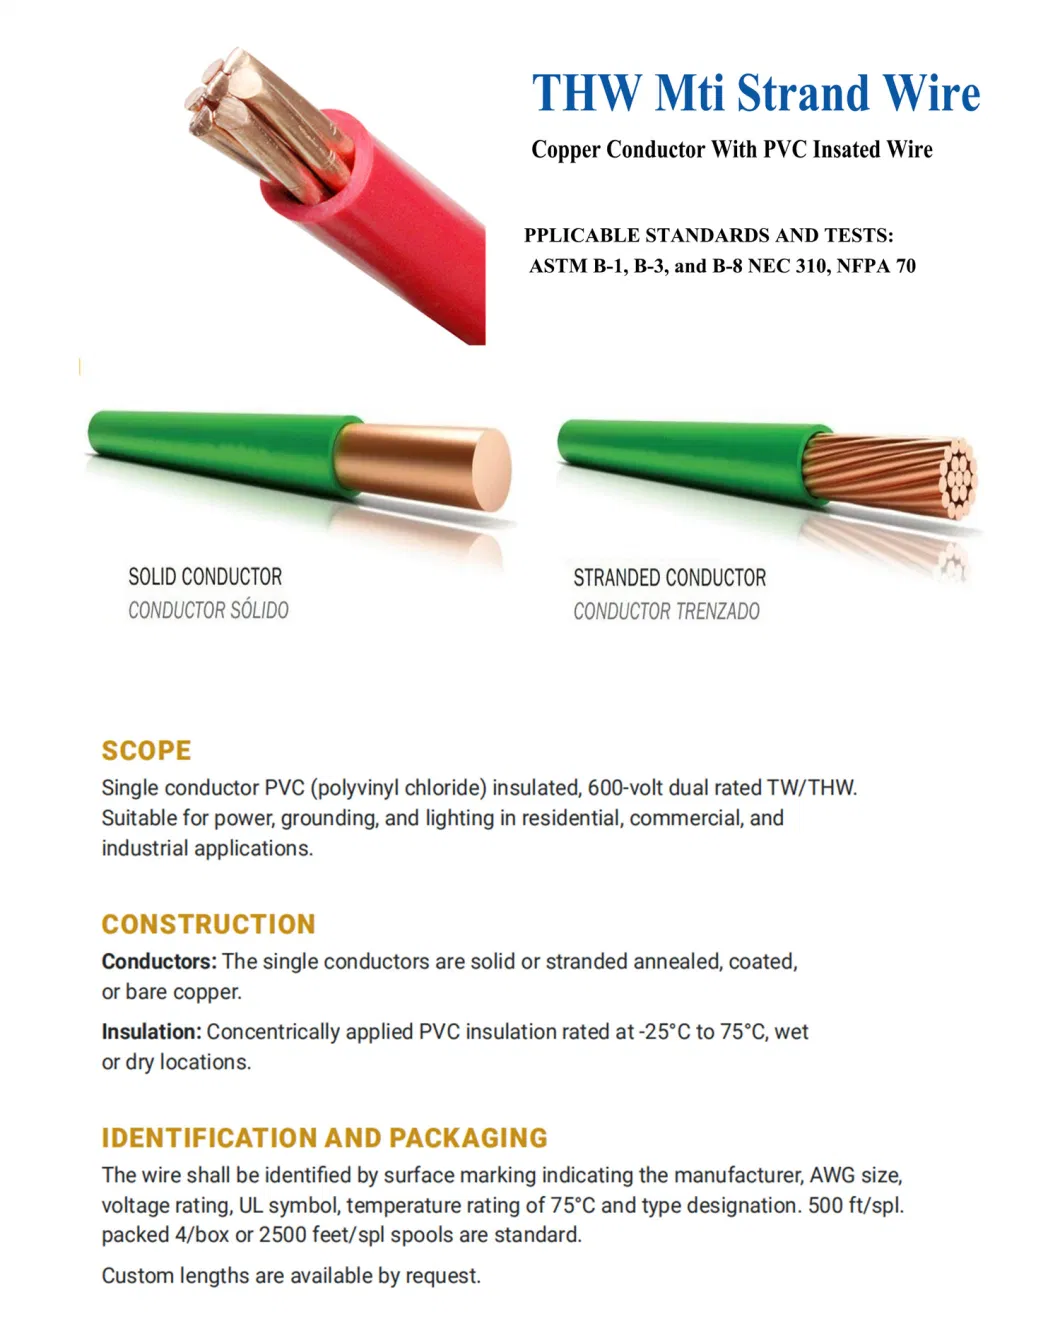 Thw Electrical Cable Copper Electrical Wires 1.5 2 2.5 4 6 10 mm